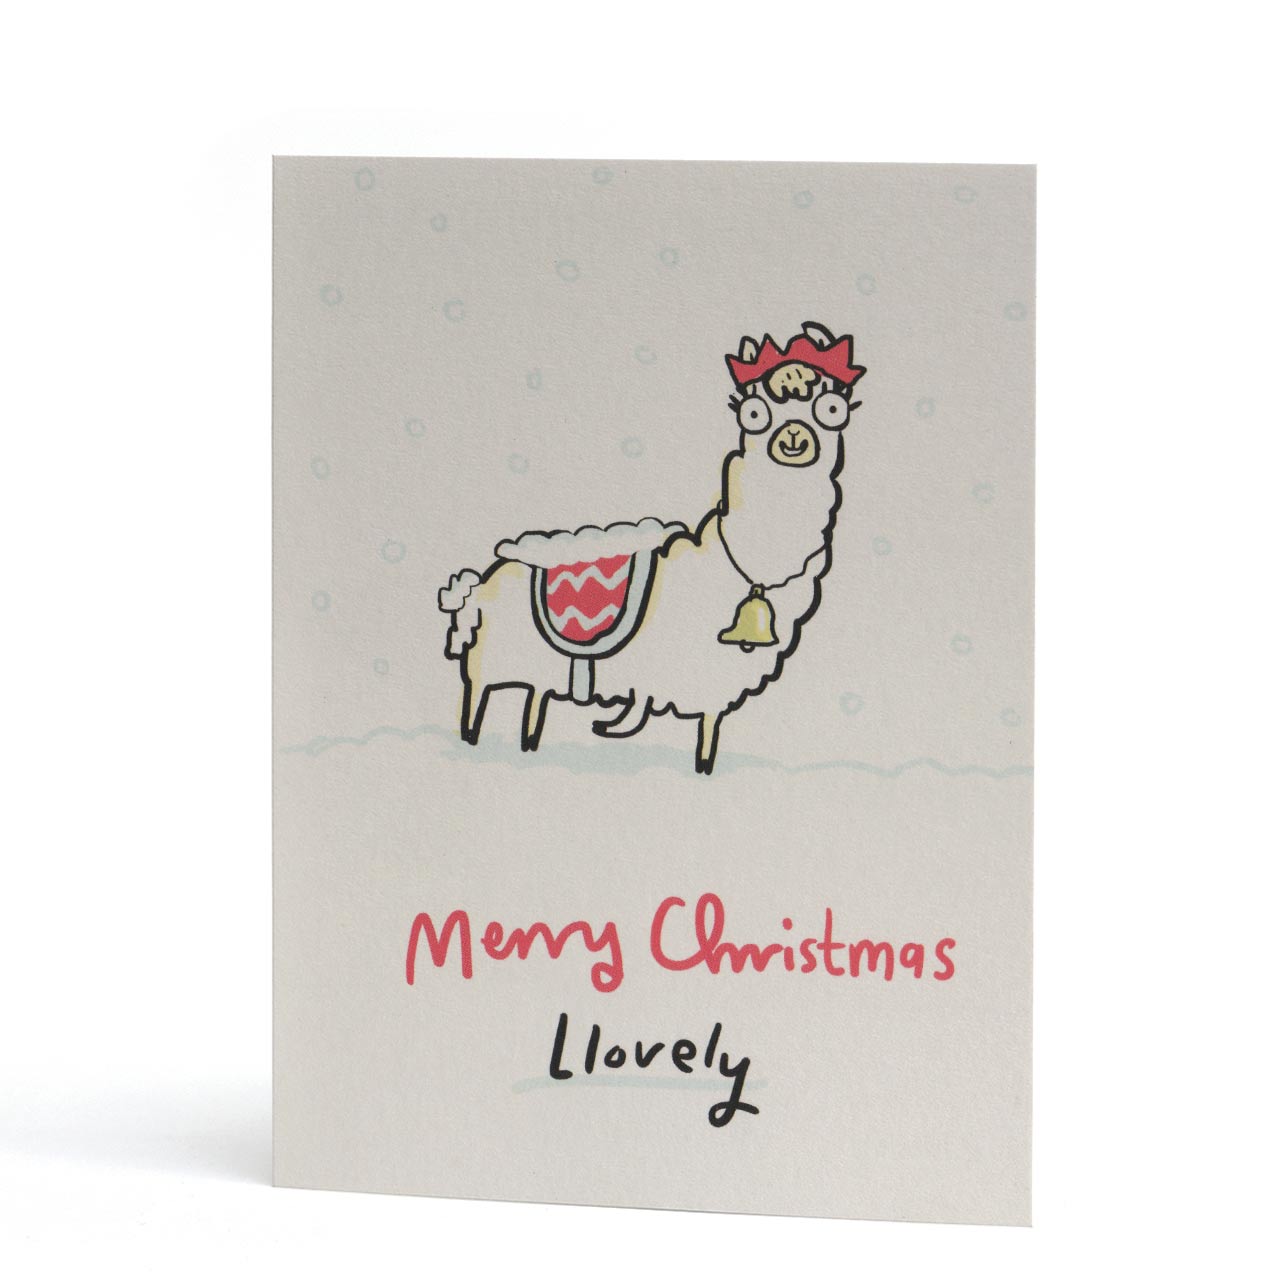 Merry Christmas Llovely Greeting Card